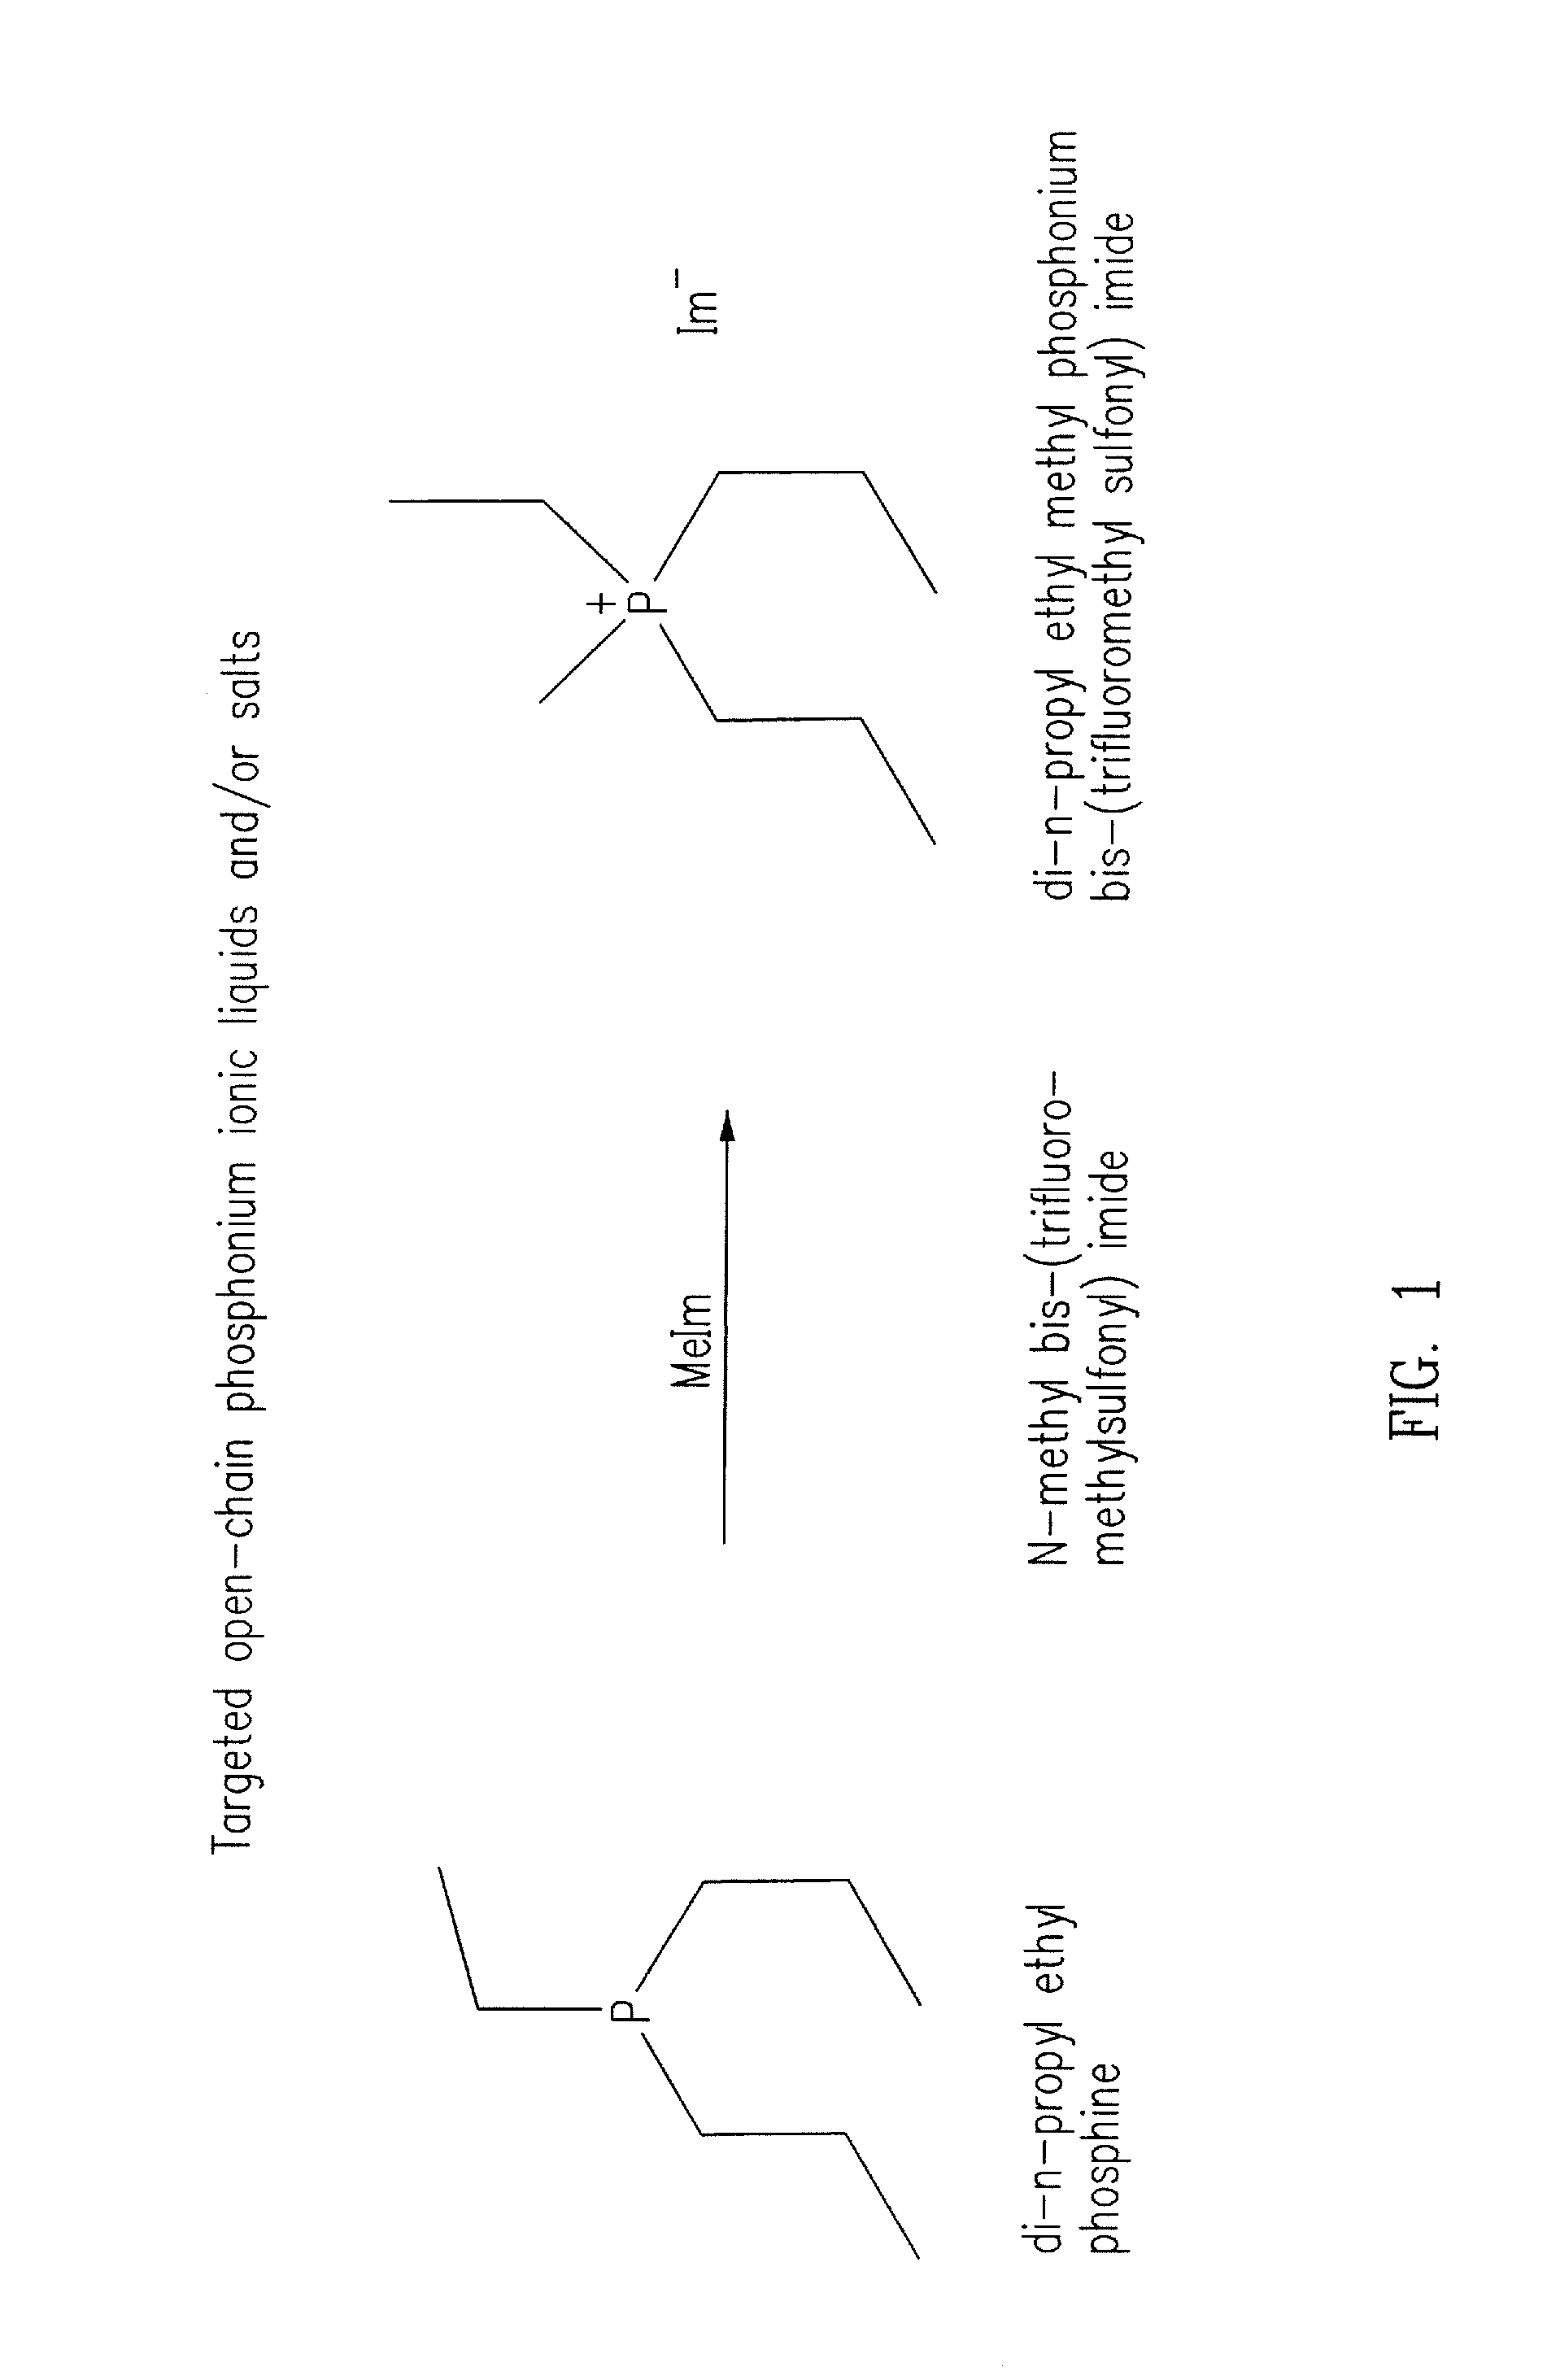 Phosphonium Ionic Liquids, Compositions, Methods of Making and Batteries Formed There From